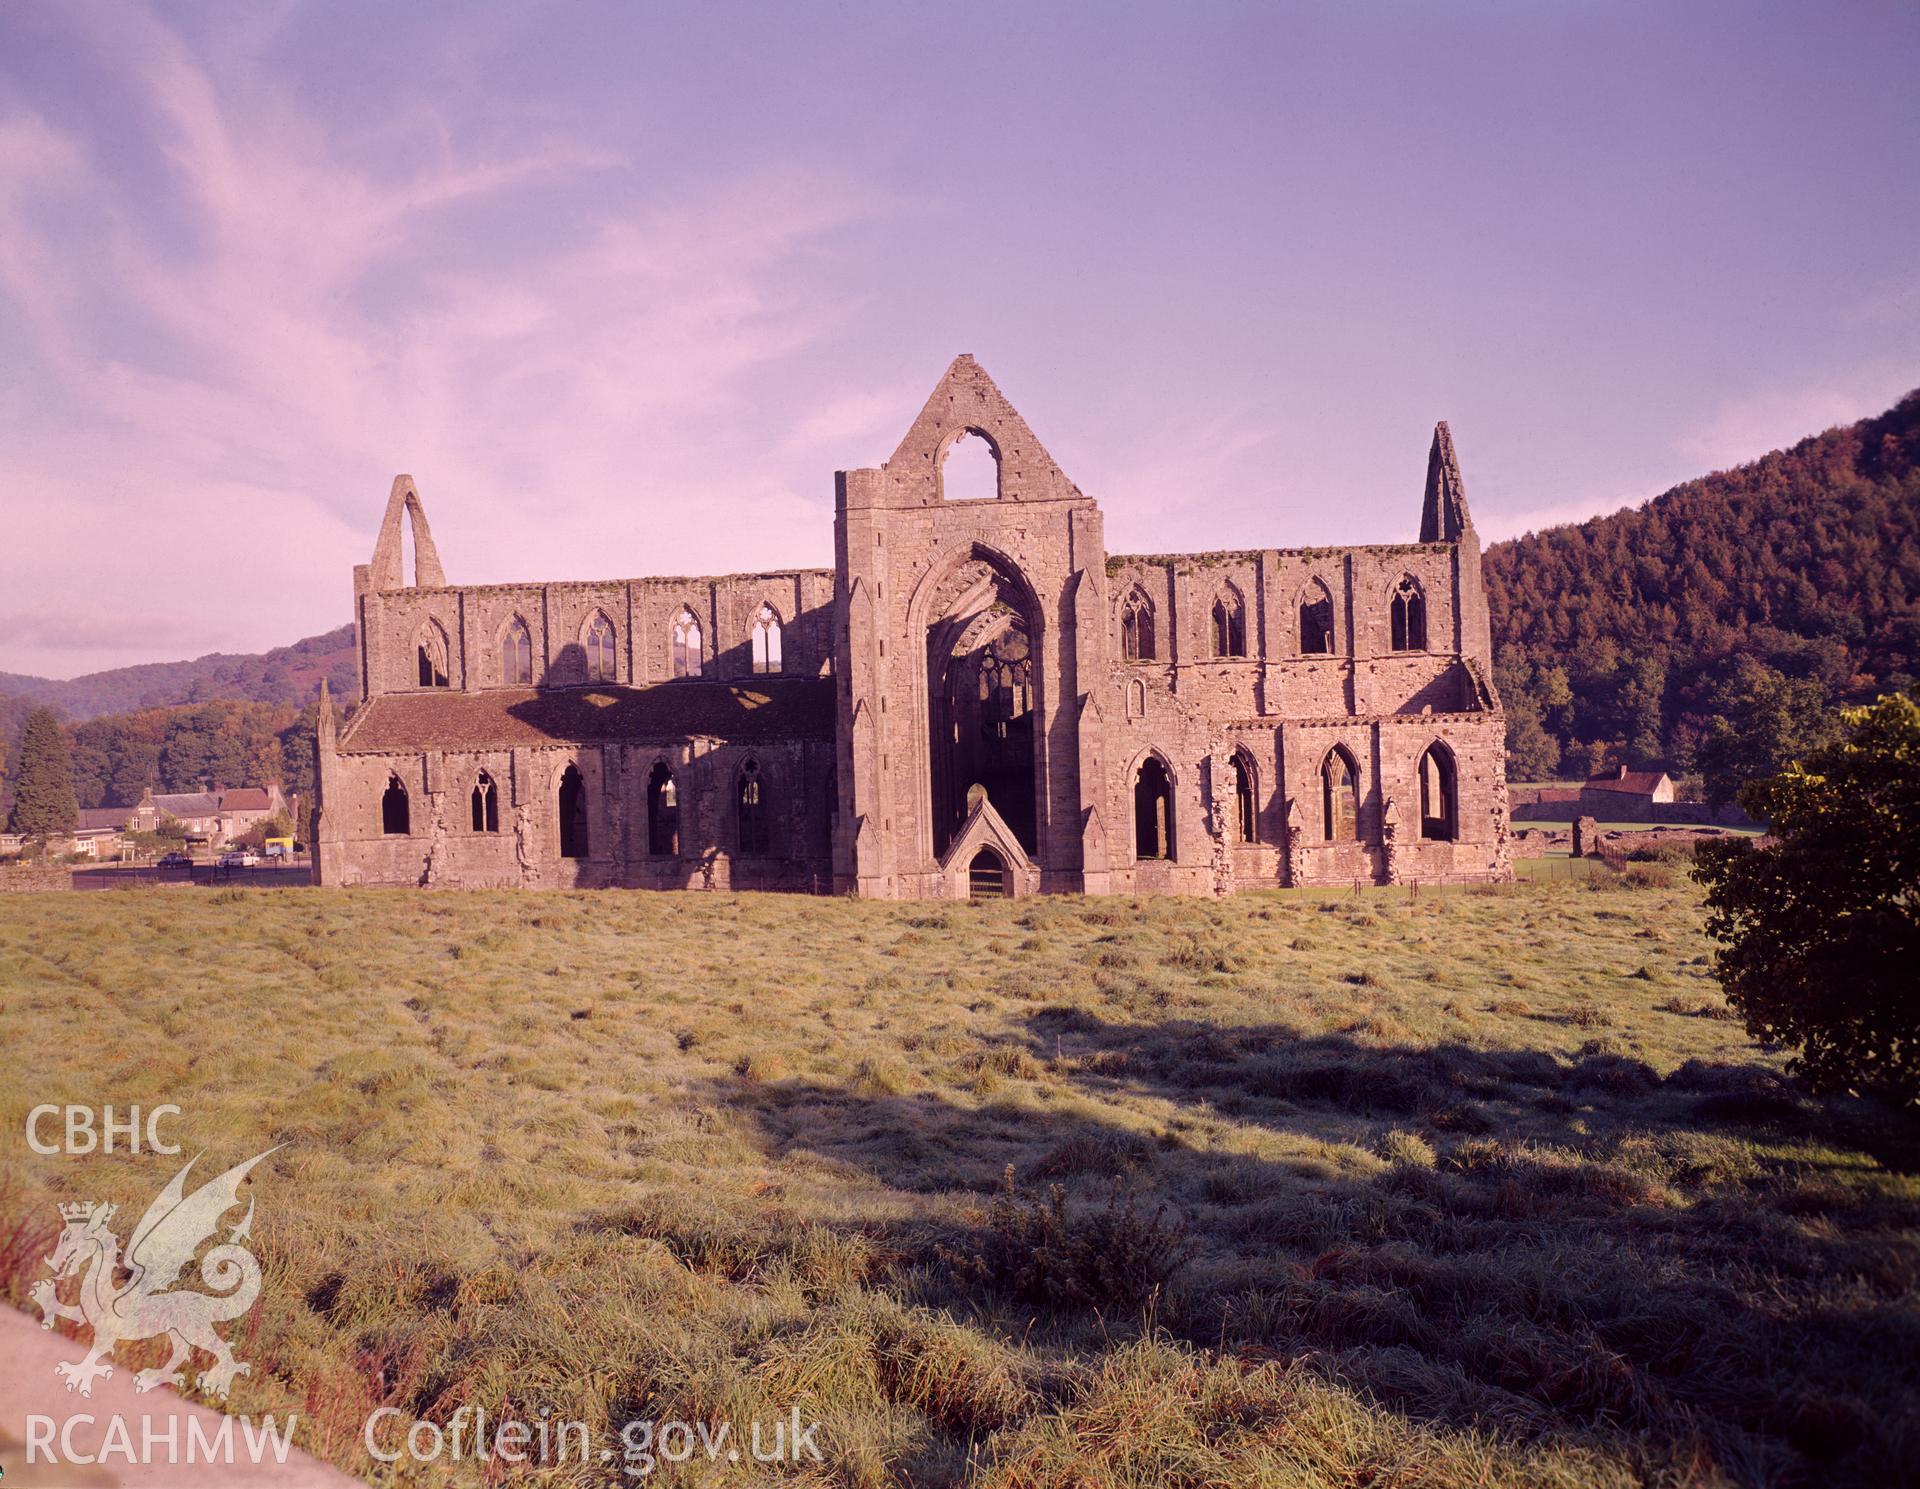 1 colour transparency showing view of Tintern Abbey; collated by the former Central Office of Information.